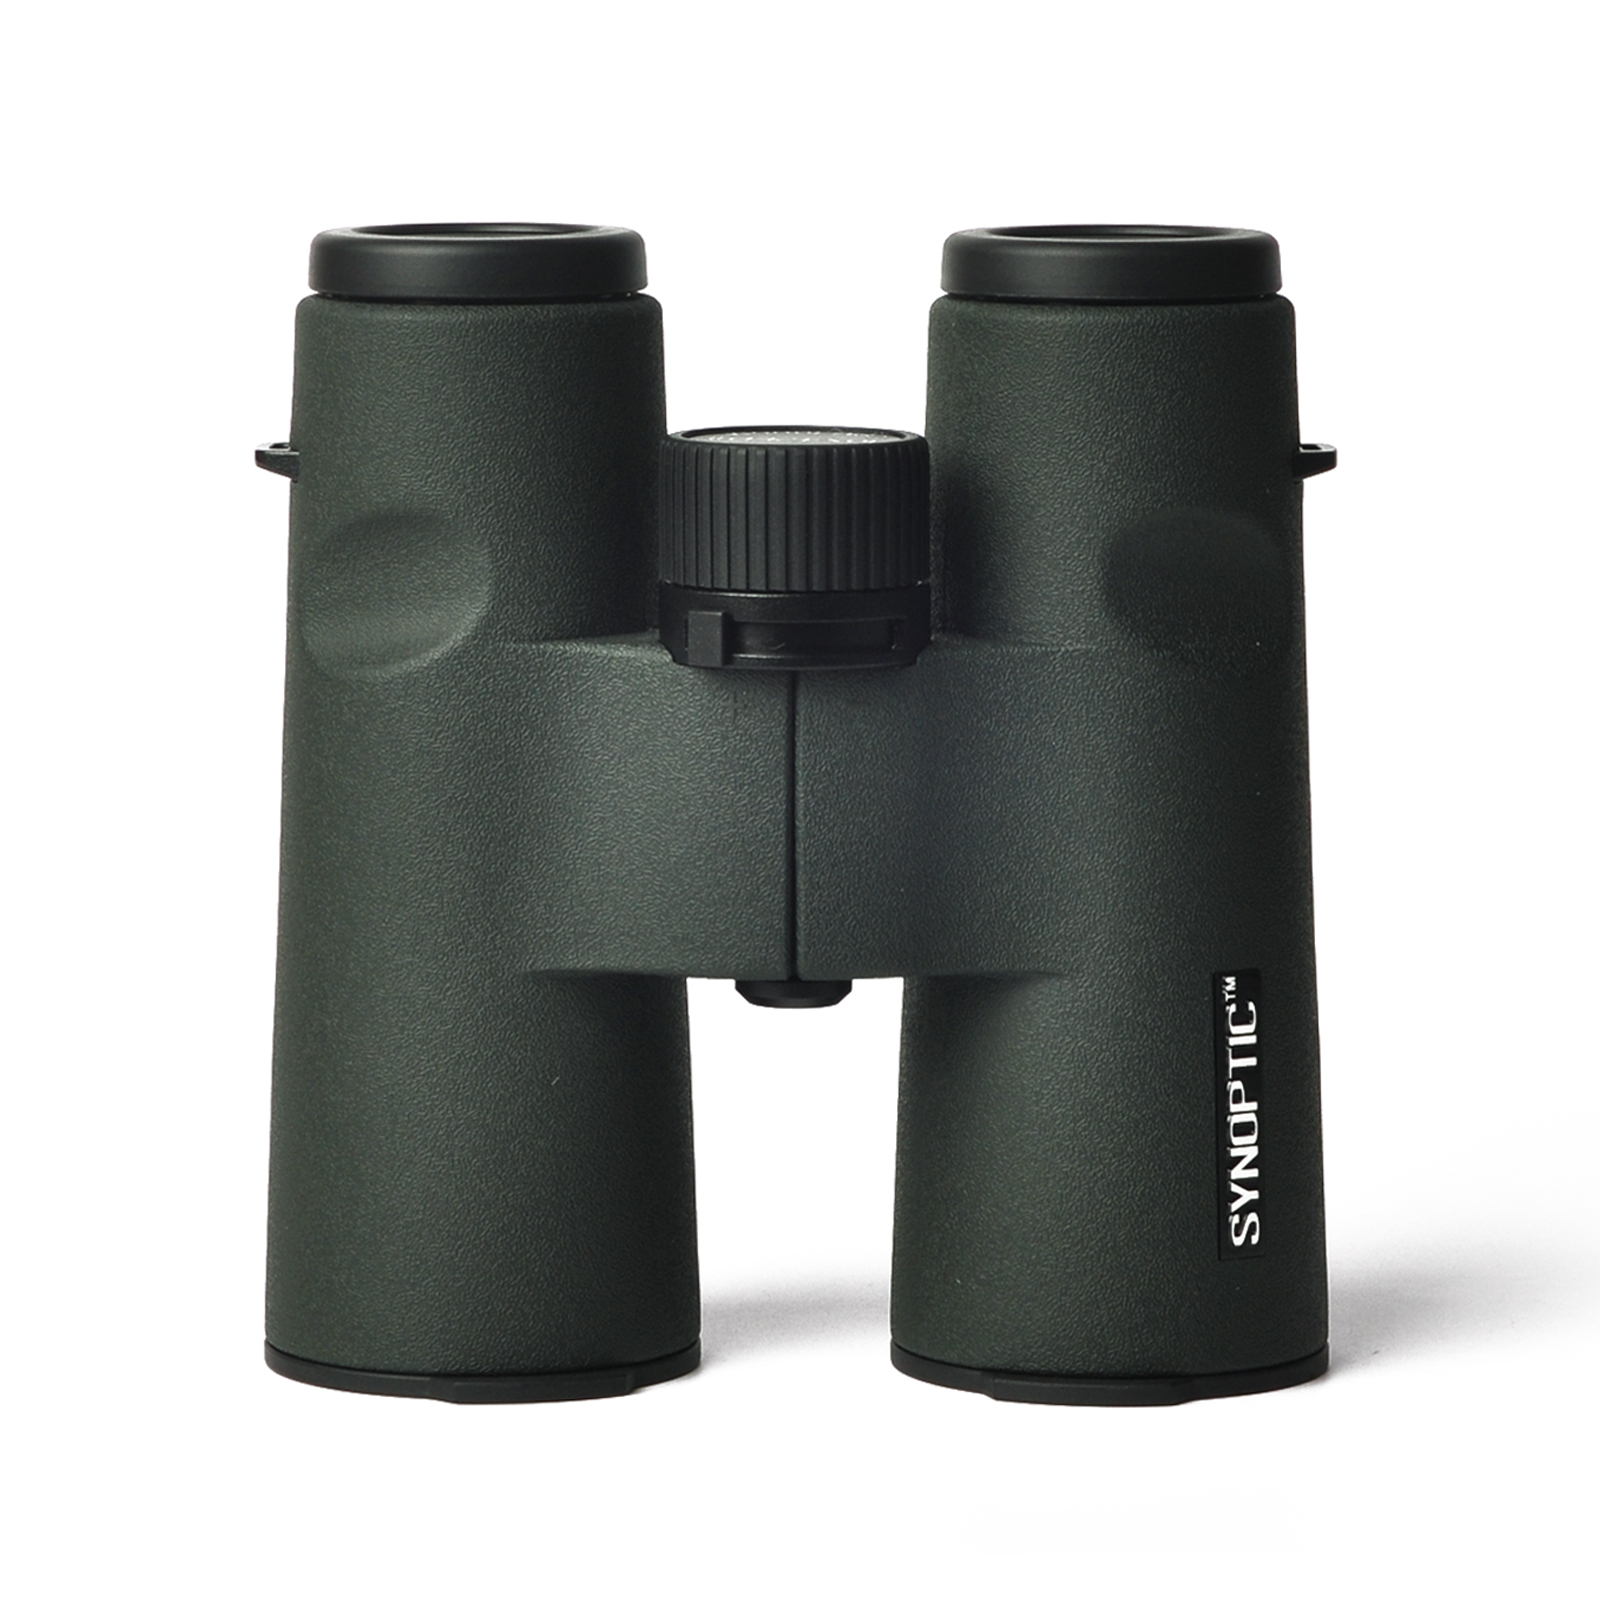 Givite 10X42EDII Binoculars - Diamond White Coating with Bak4 Prisms-Waterproof Fogproof, Rubber Armored Binocular for Bird Watching Hunting Outdoor Sports Travel Theater and Concerts